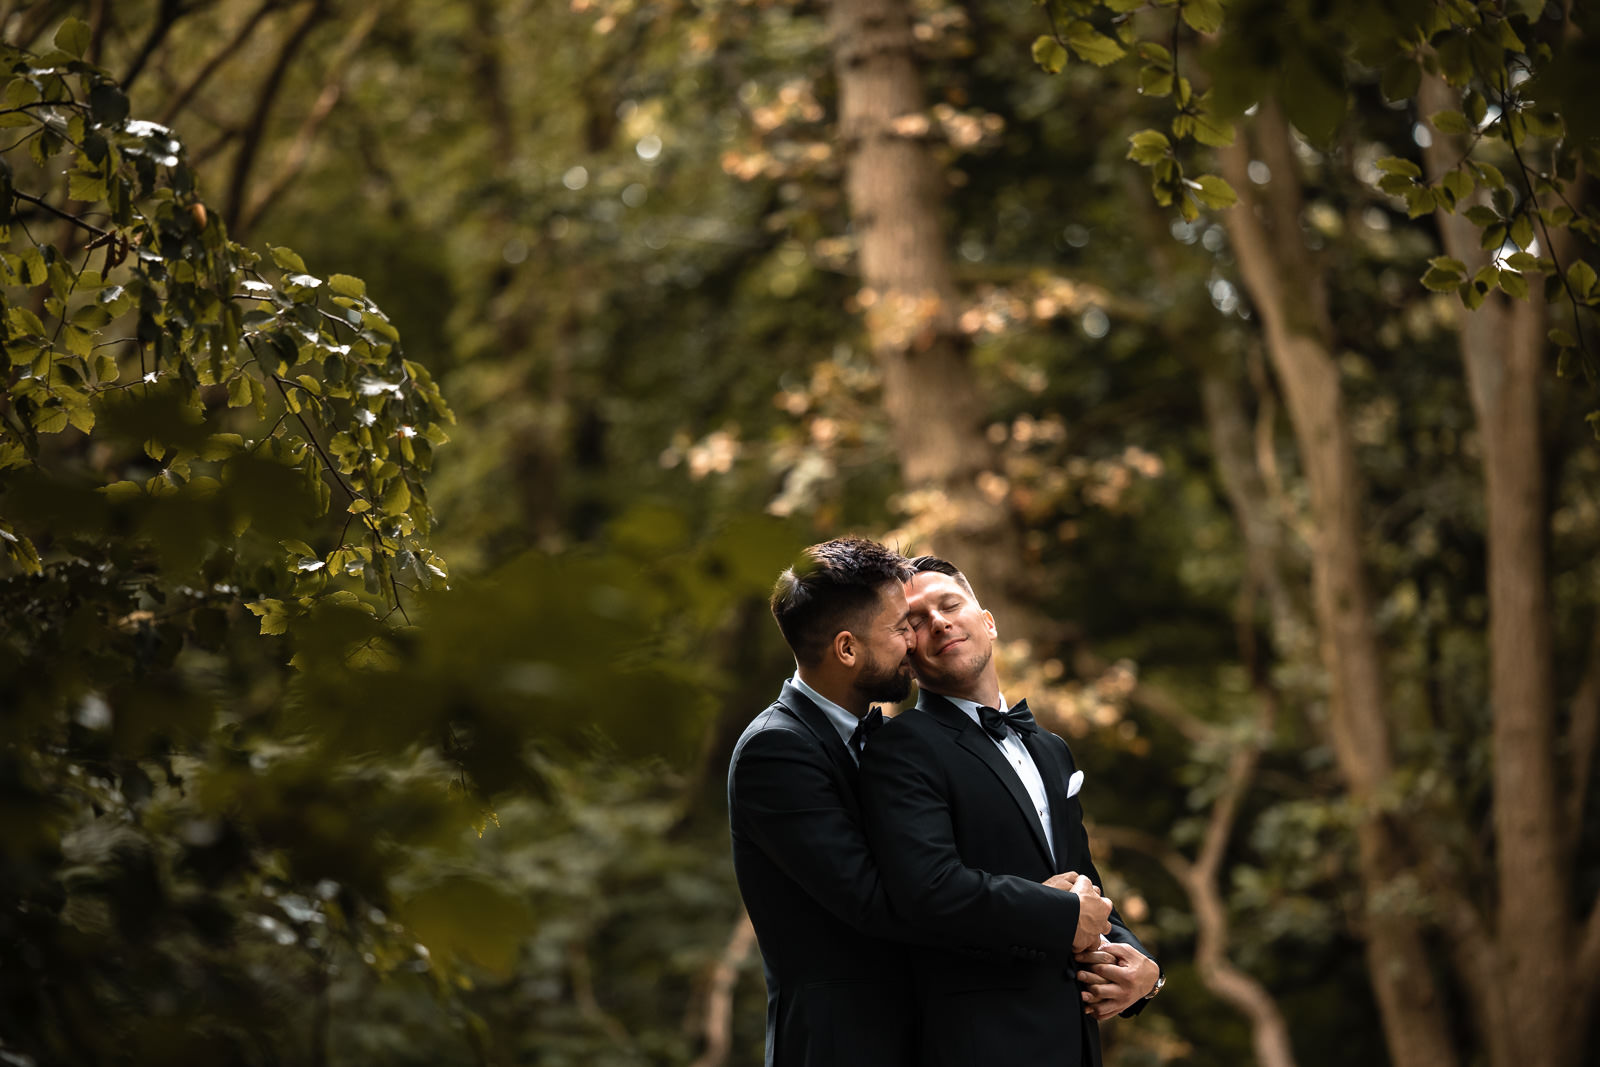 Intimate shot of the two grooms same sex wedding